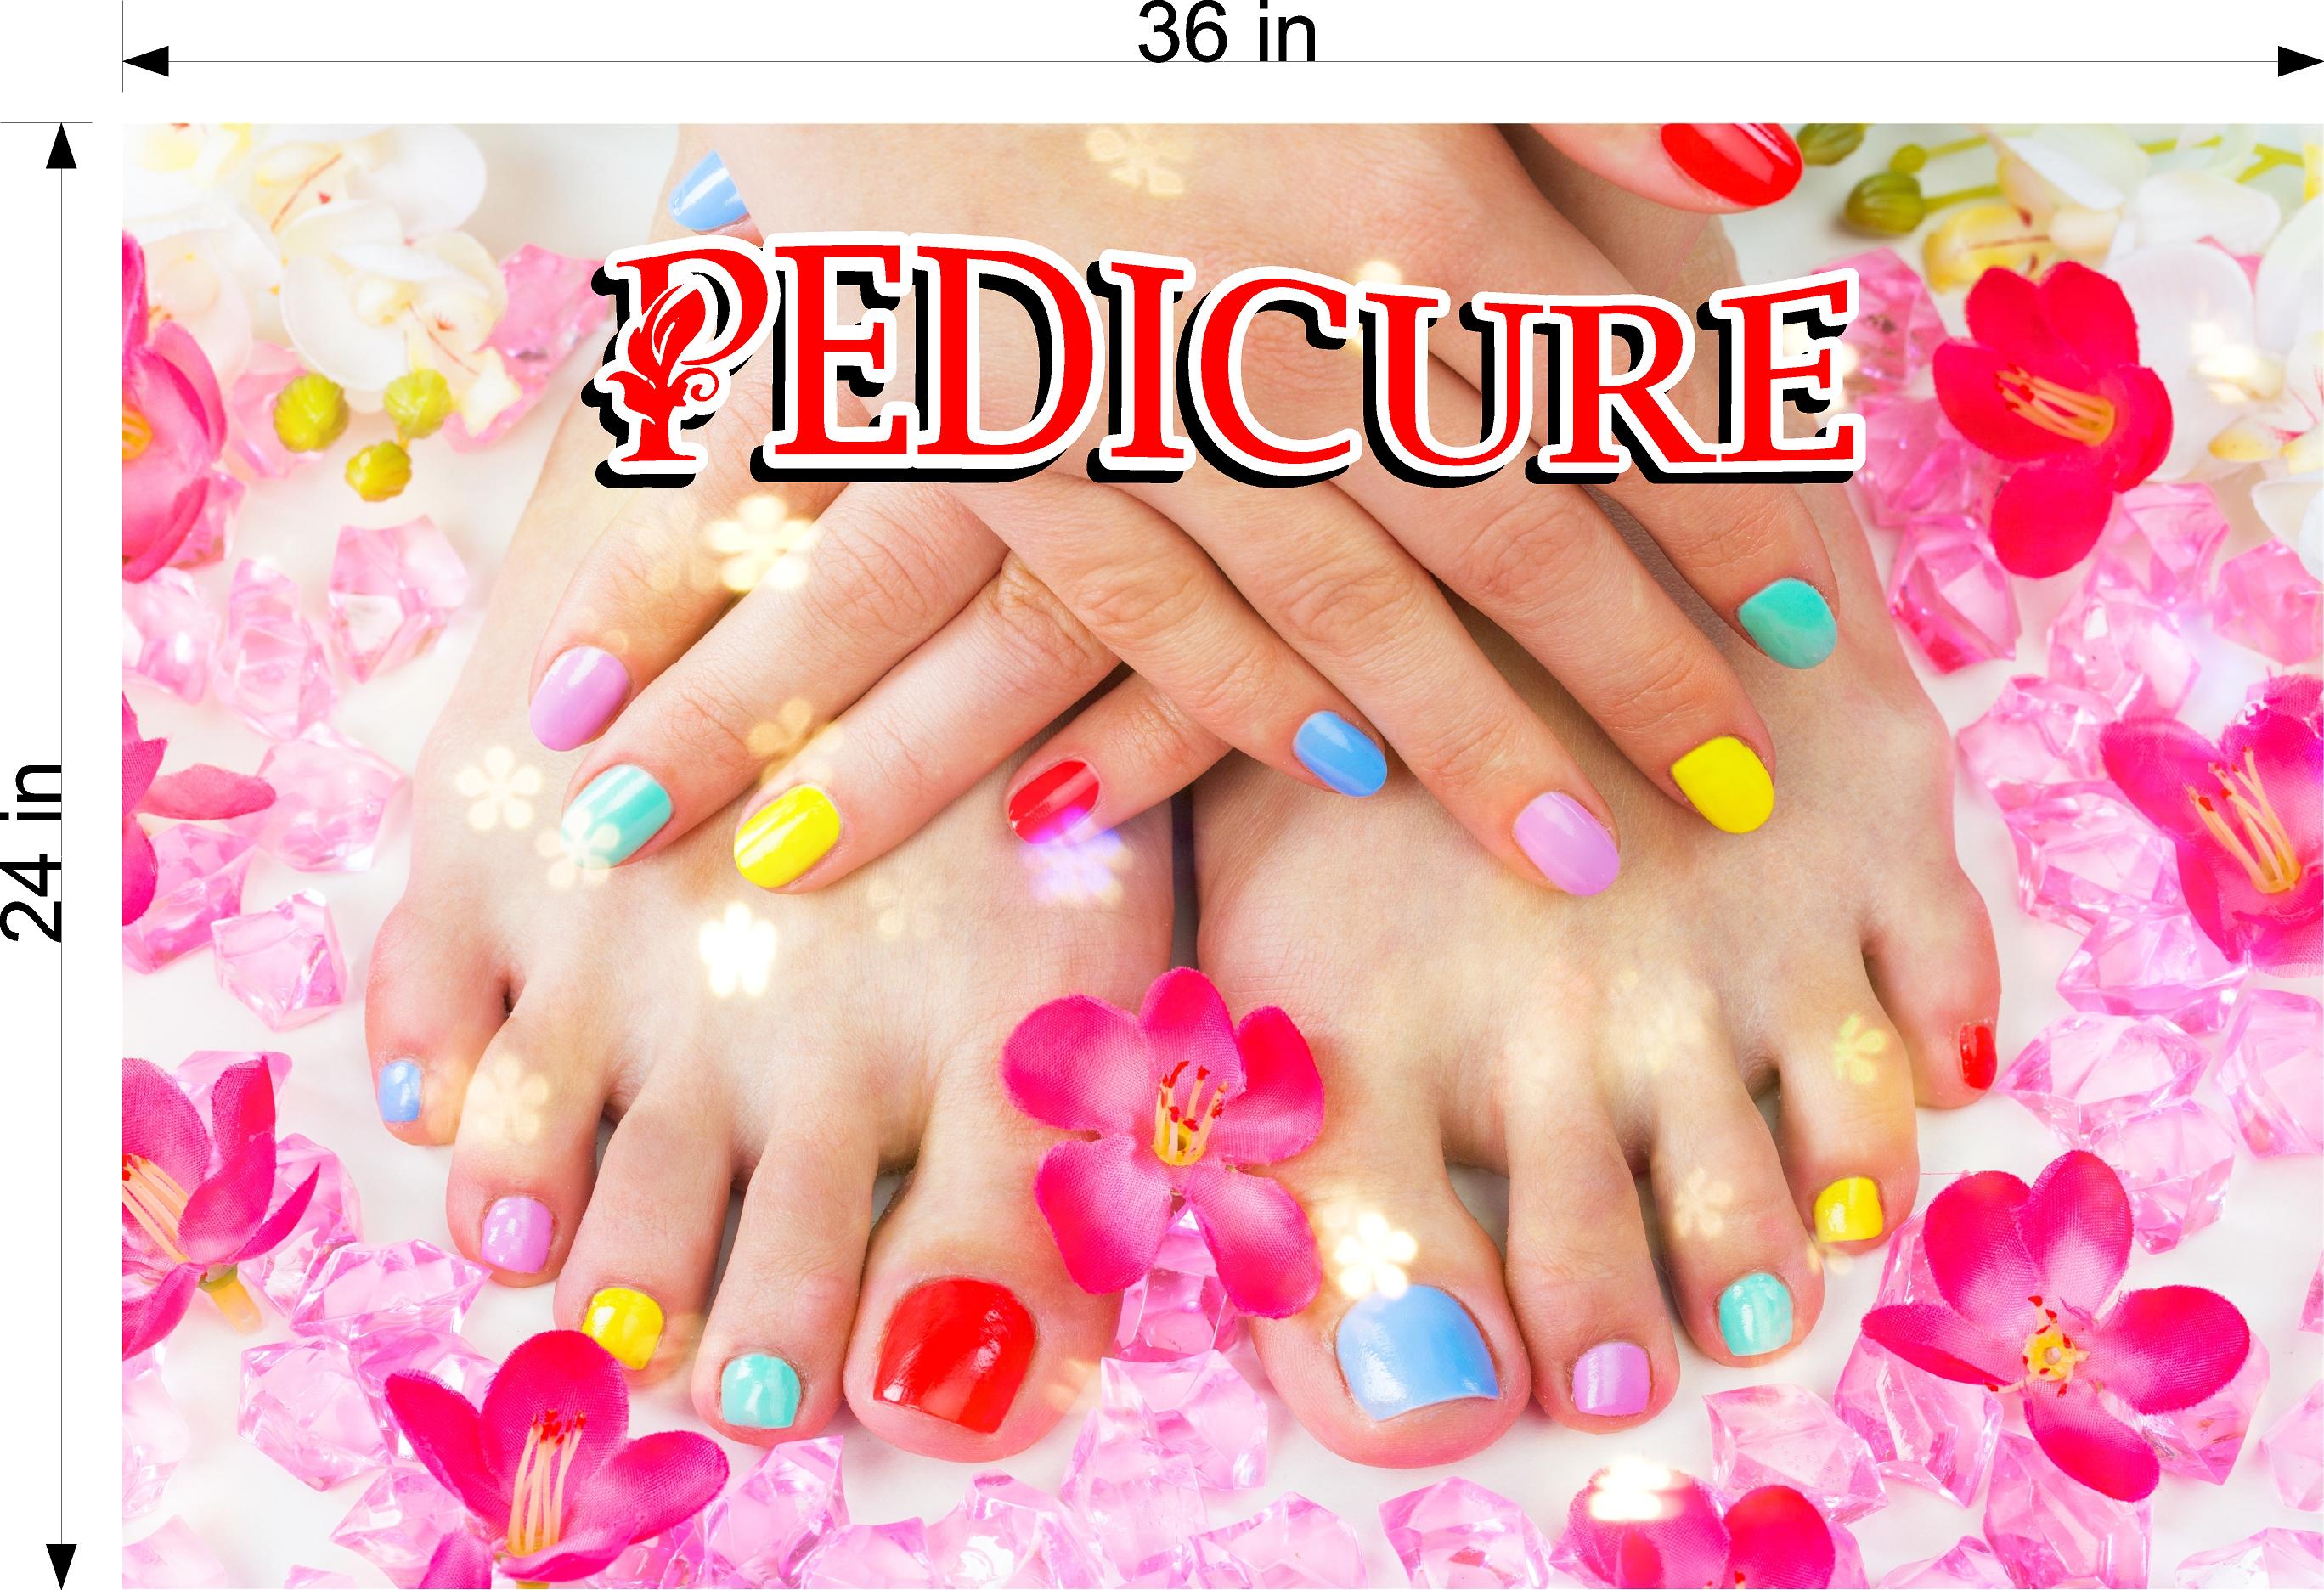 Pedicure 29 Wallpaper Fabric Poster Decal with Adhesive Backing Wall Sticker Decor Indoors Interior Sign Horizontal